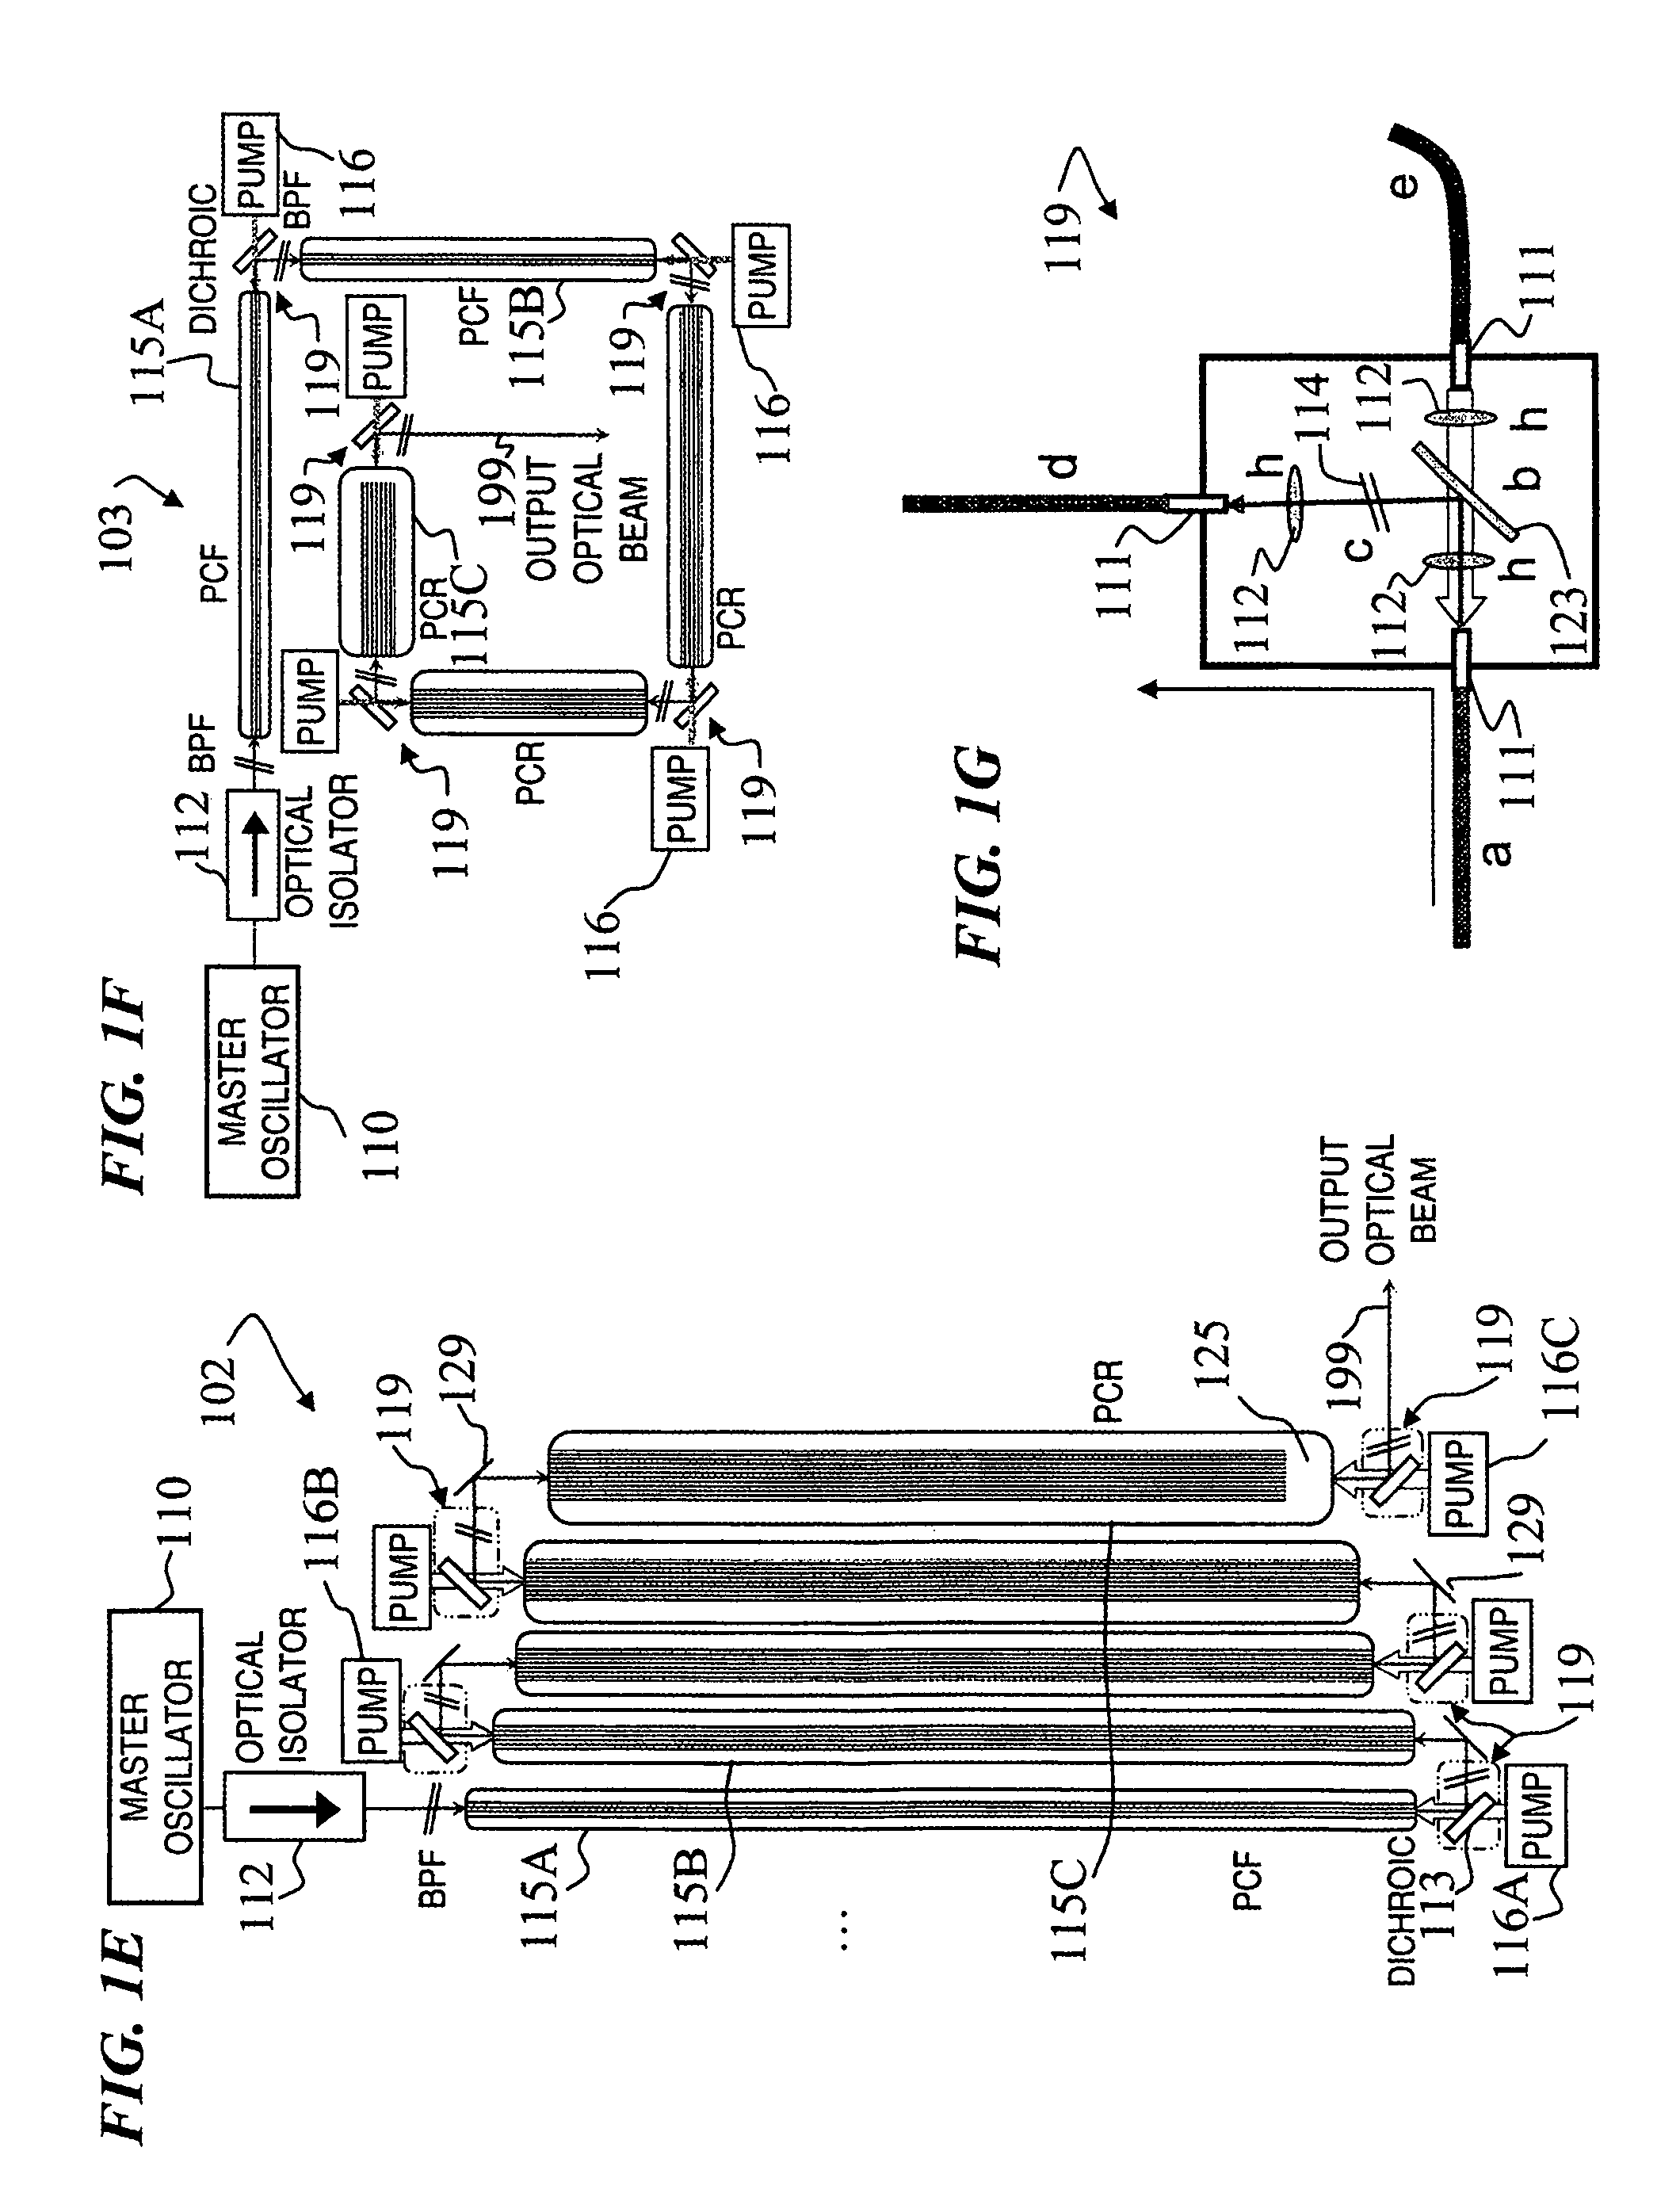 Method and apparatus for long-range lidar and active imaging with optical output from a photonic-crystal rod